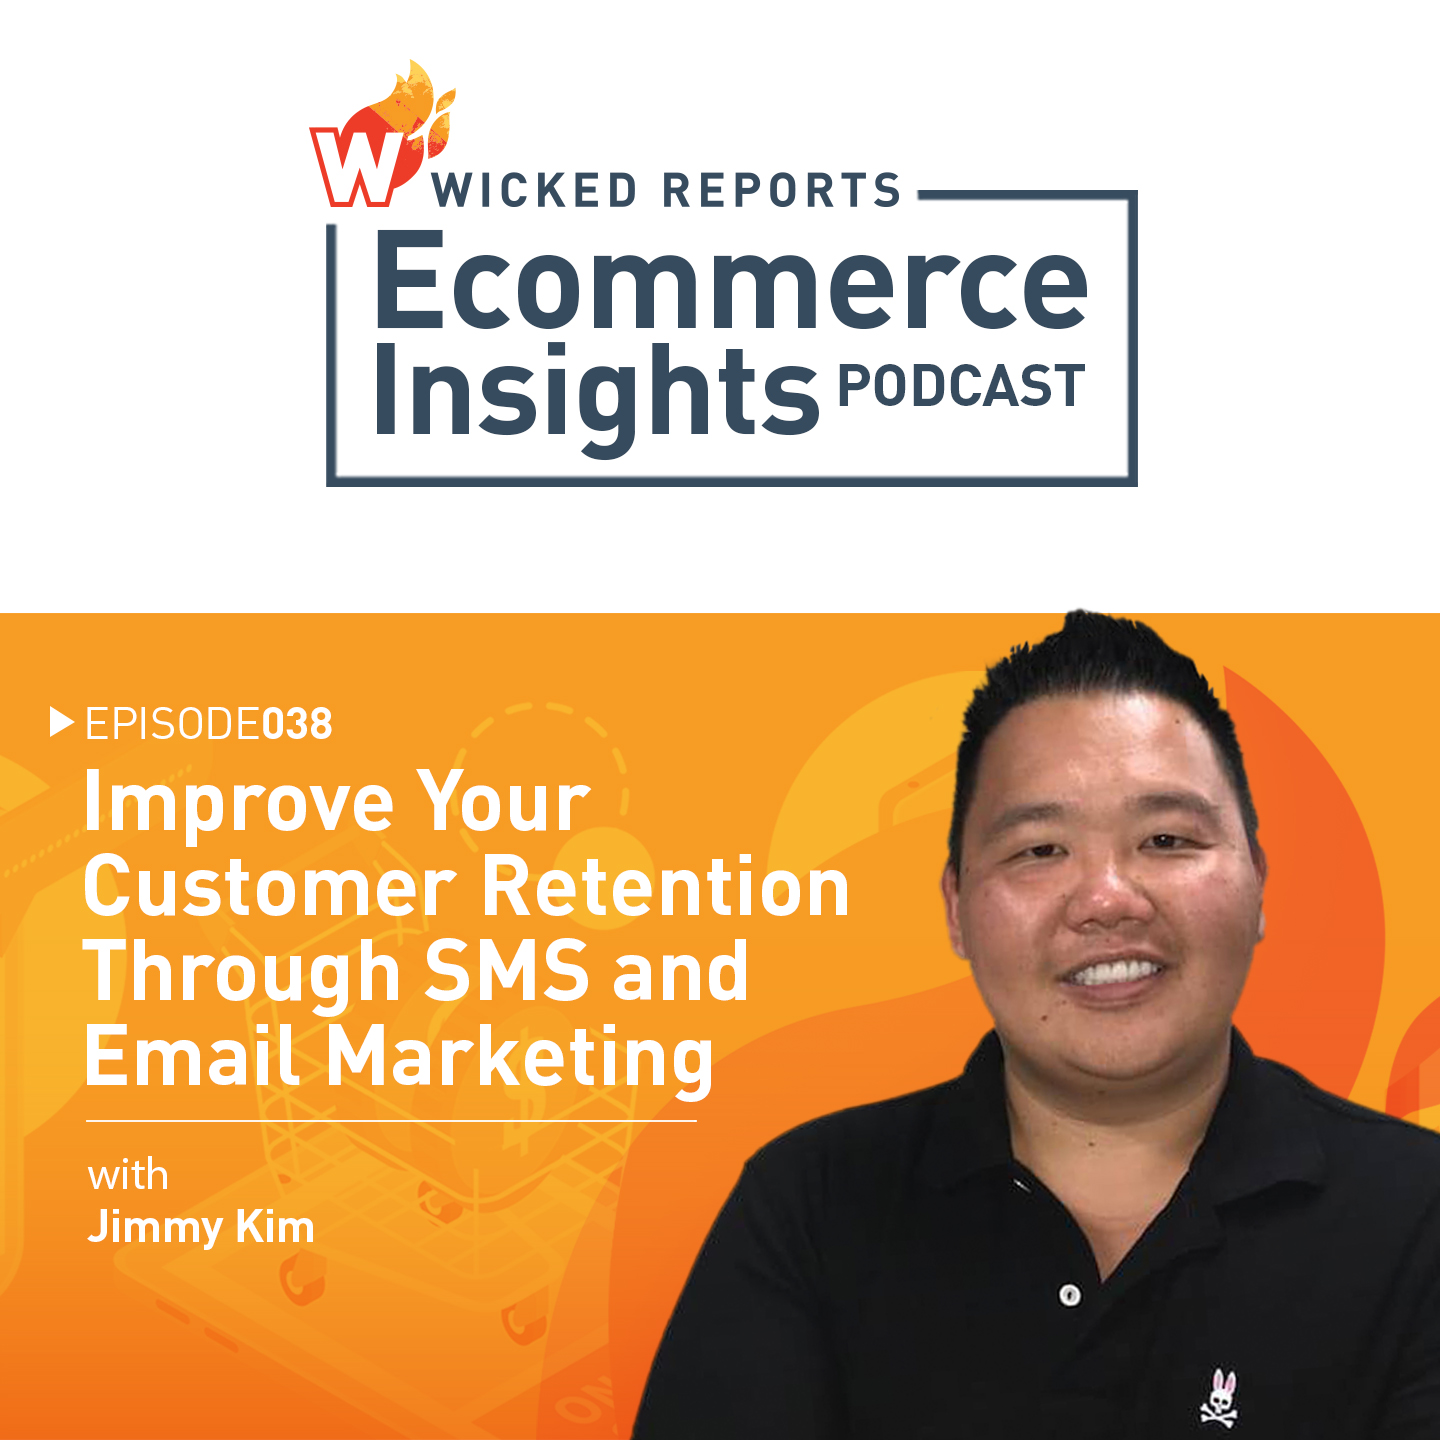 Improve Your Customer Retention Through SMS and Email Marketing With Jimmy Kim